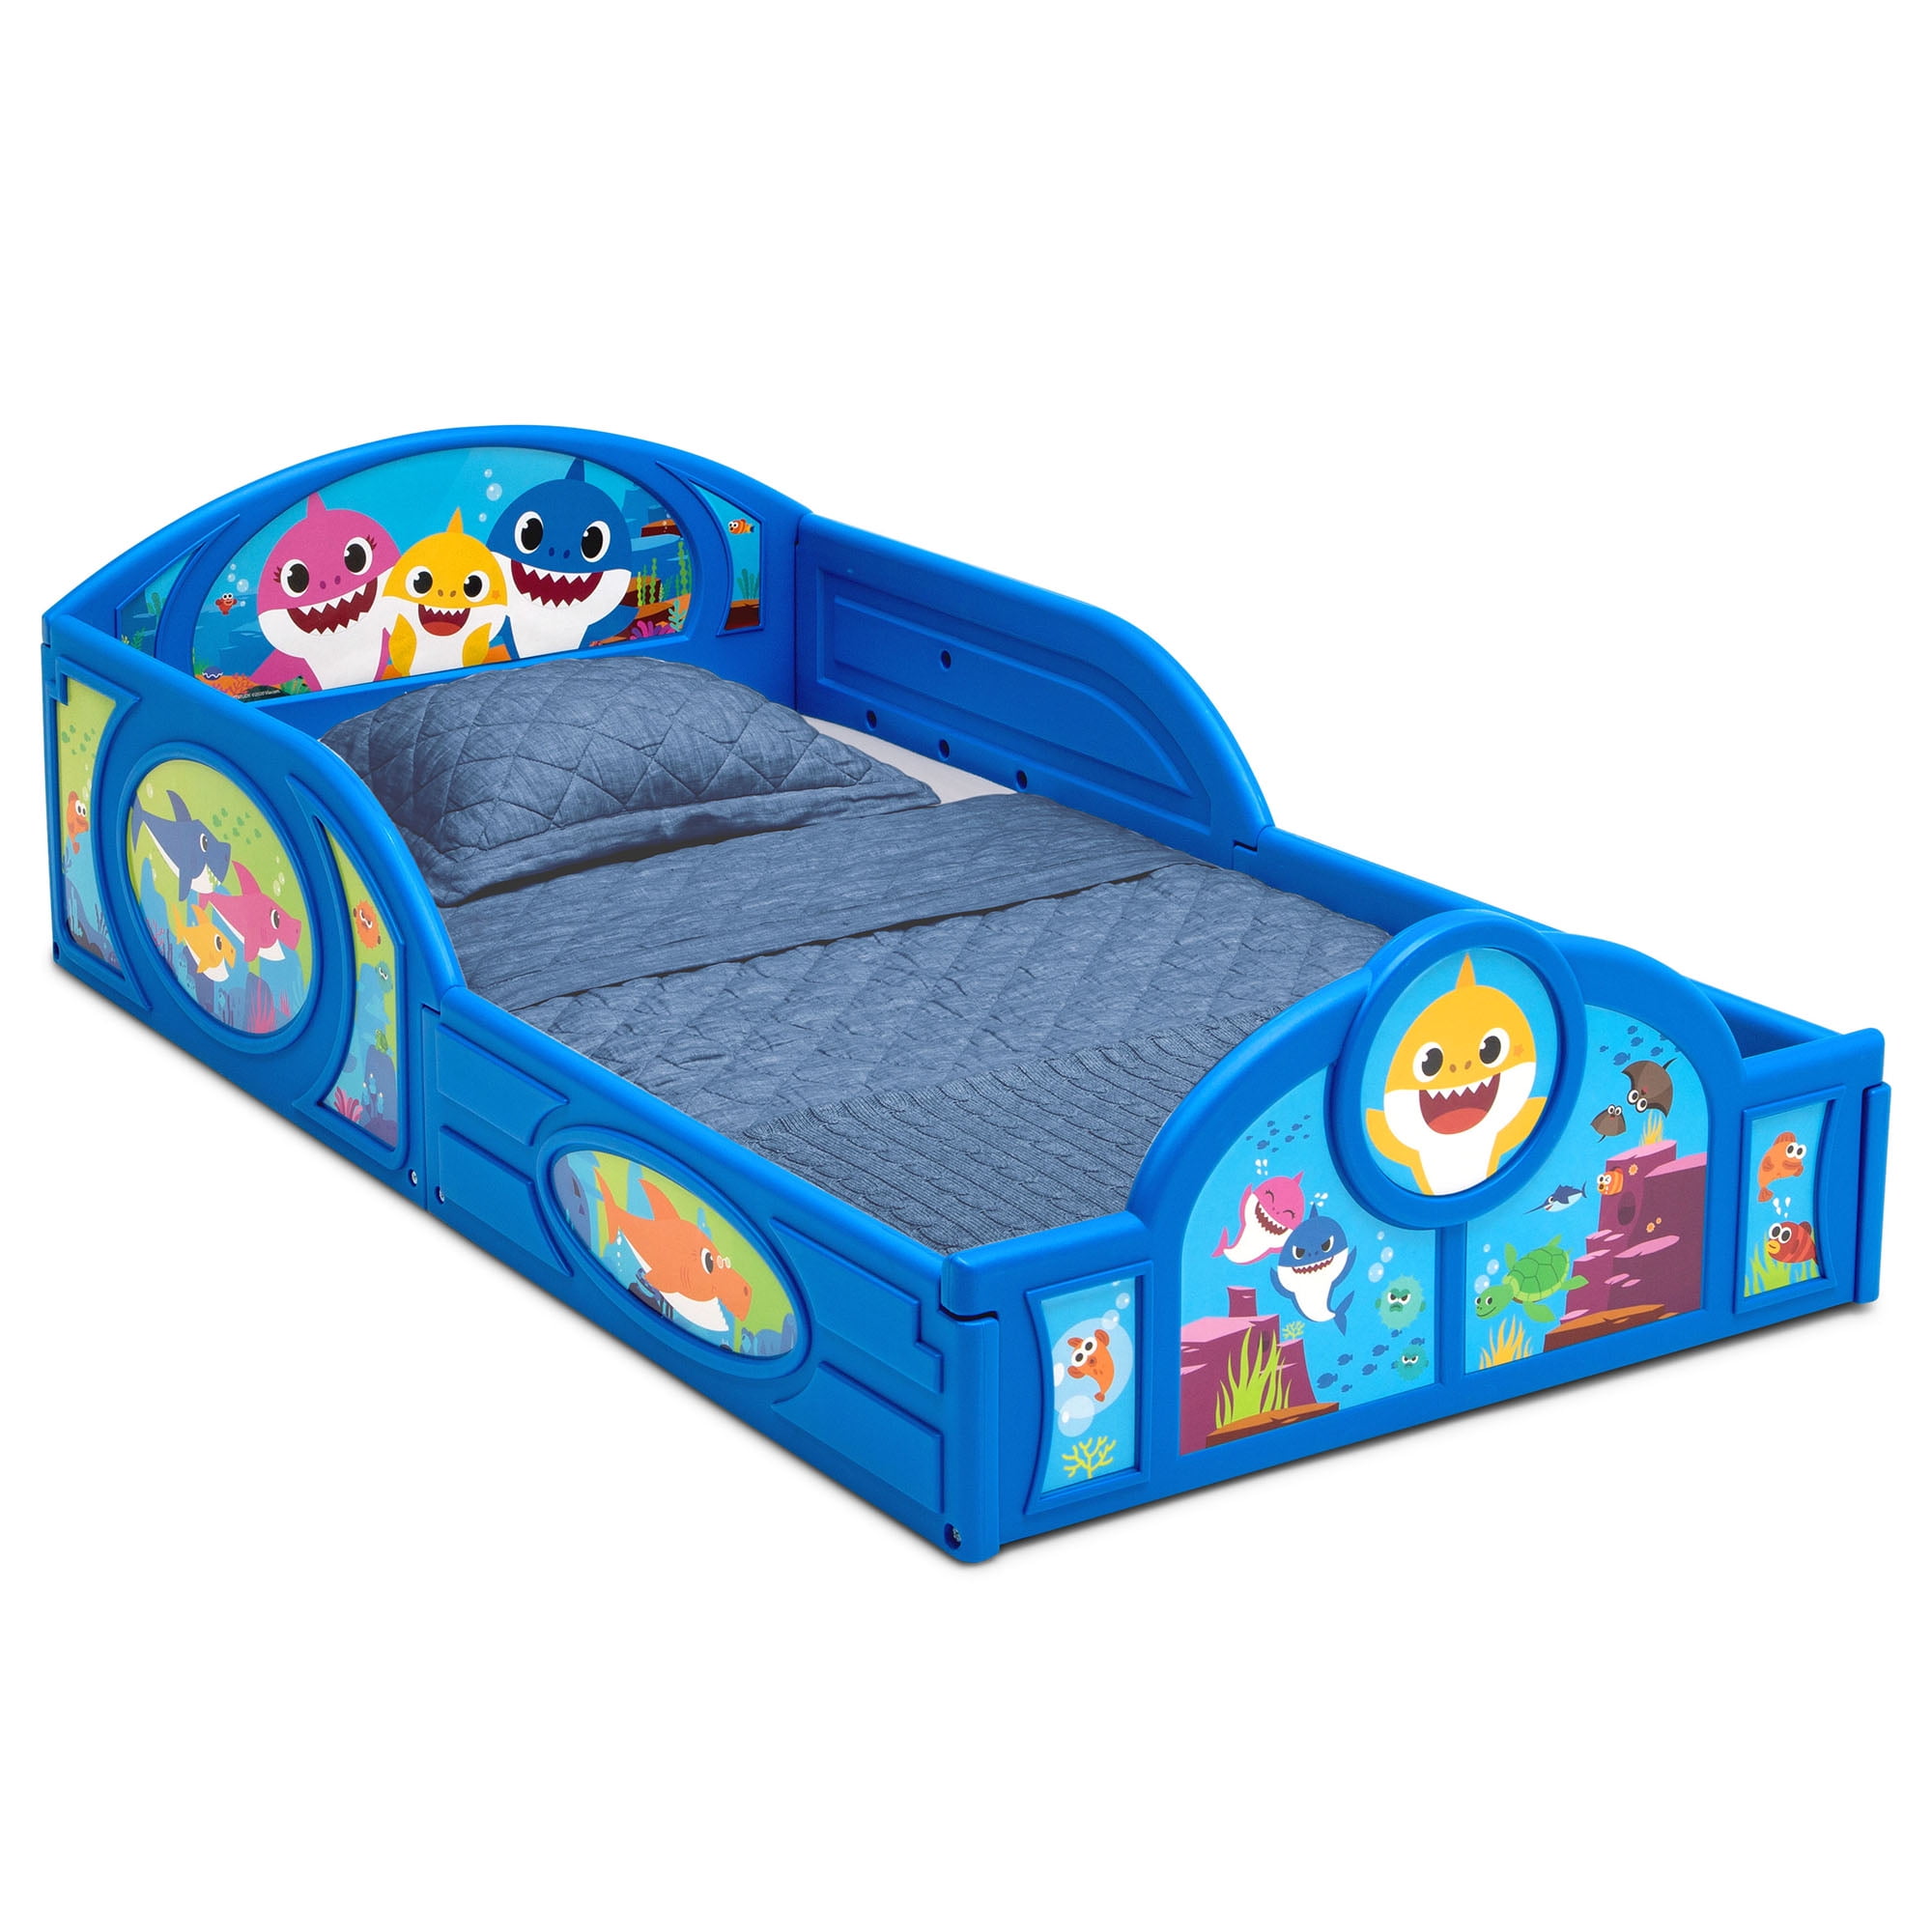 Baby Shark Plastic Sleep and Play Plastic Toddler Bed w/ Attached Guardrails $43 + Free Shipping